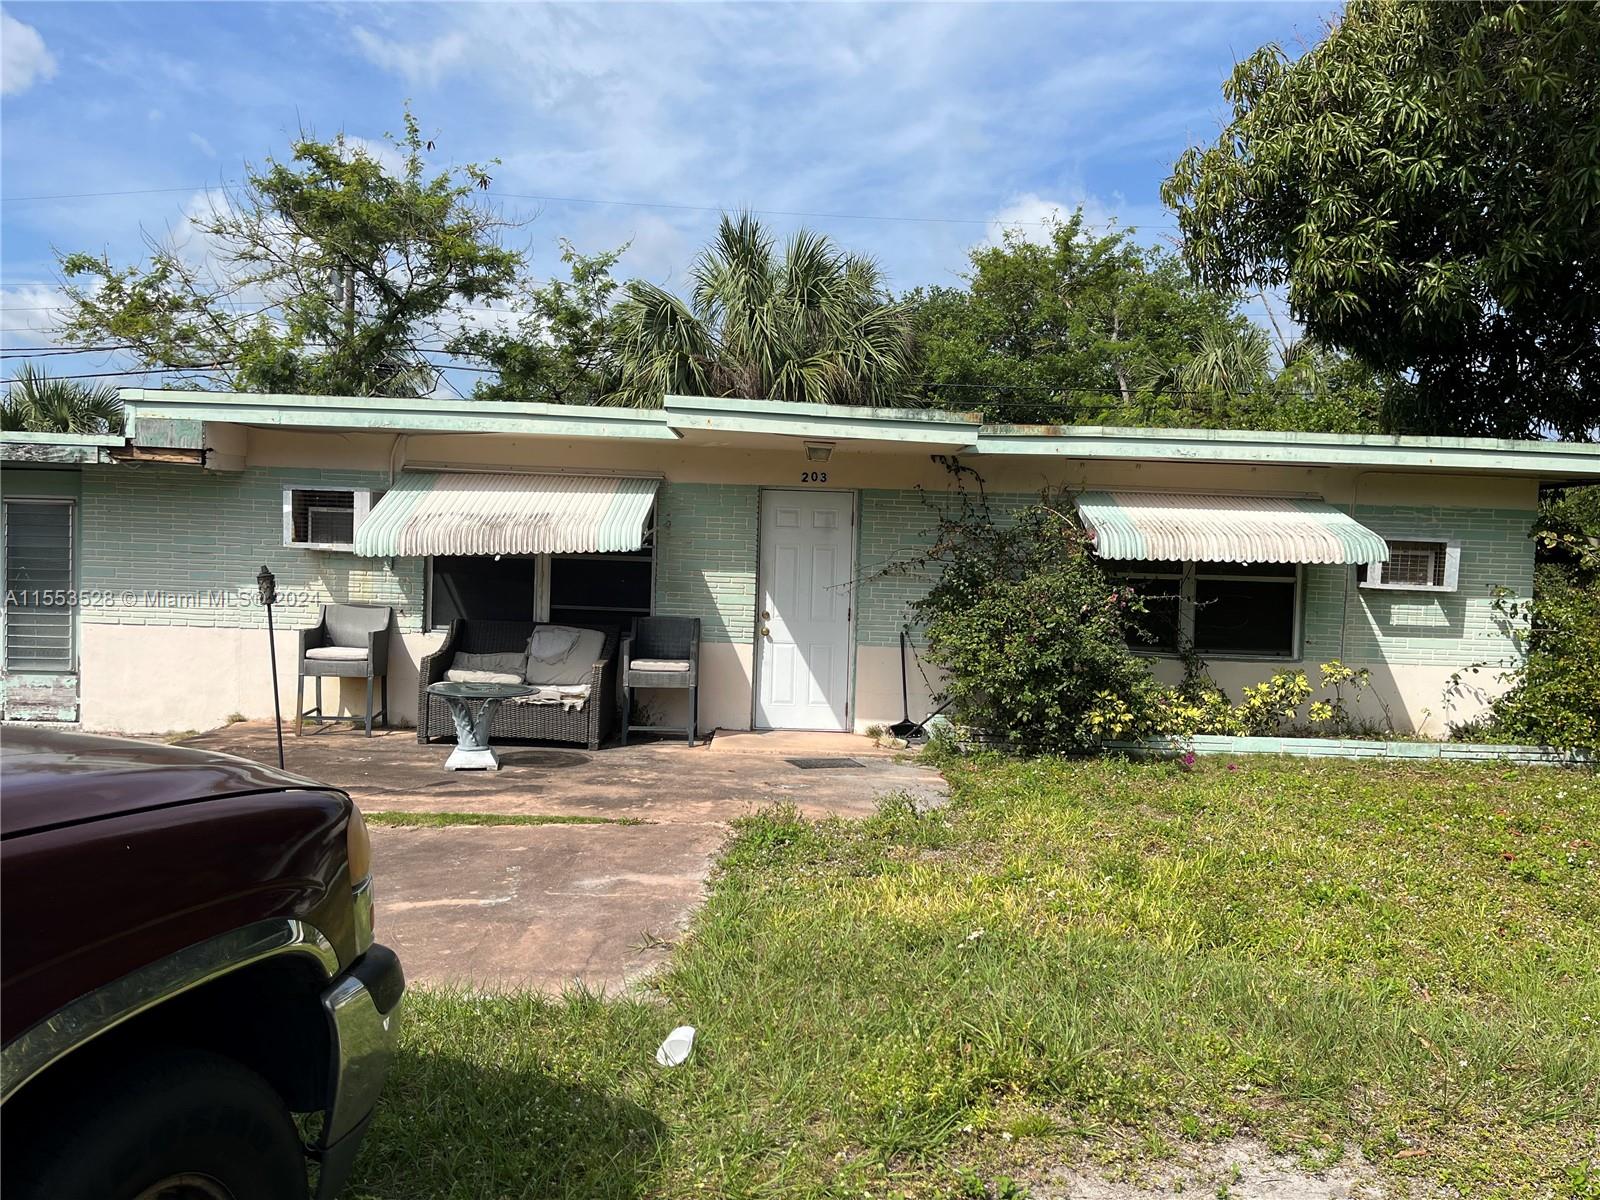 Property for Sale at 203 Nw 27th Ter Ter, Fort Lauderdale, Broward County, Florida - Bedrooms: 3 
Bathrooms: 2  - $310,000